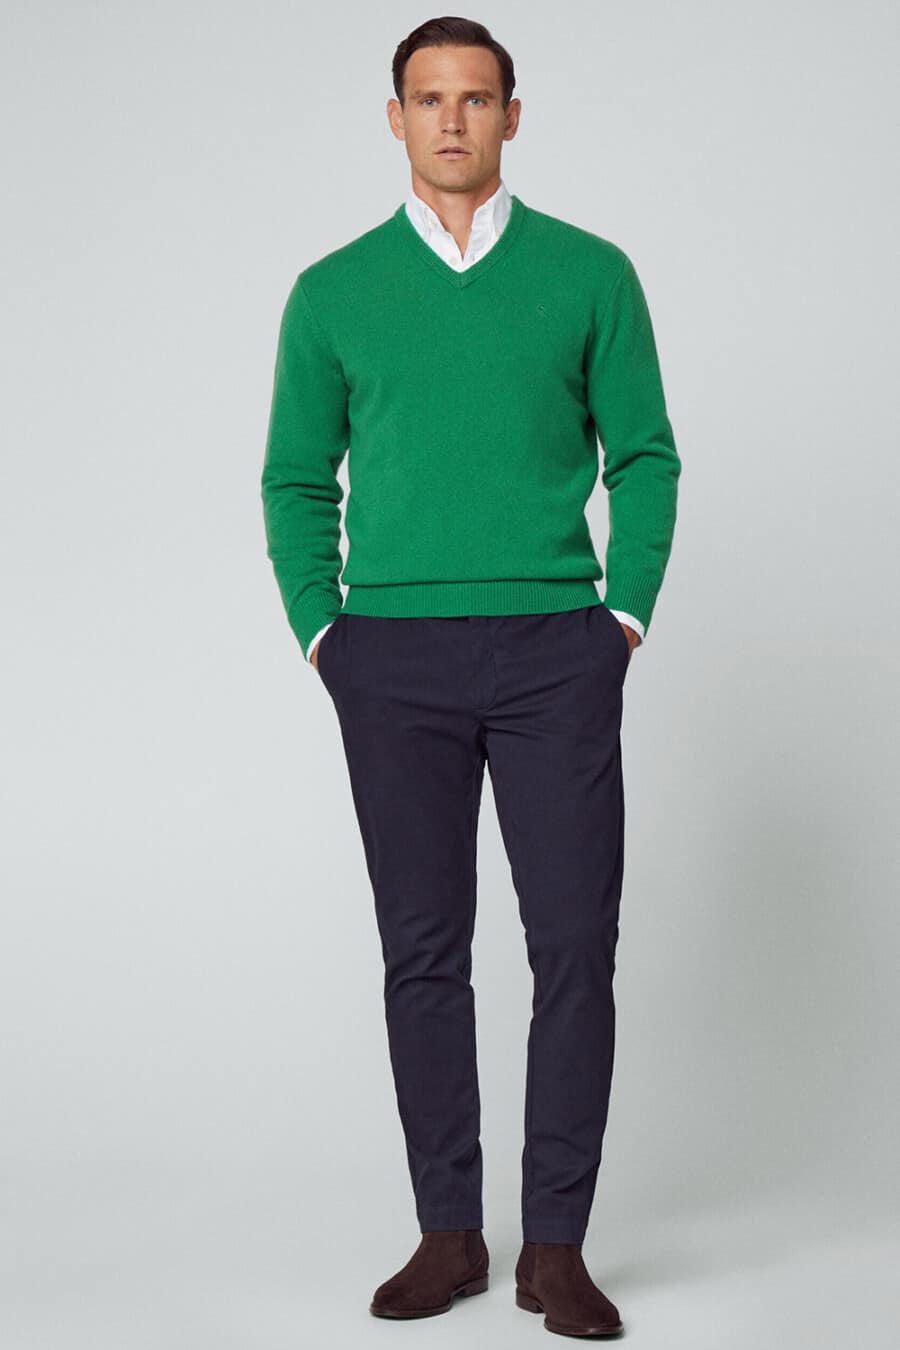 Men's navy pants, white Oxford shirt, bright green V-neck sweater and brown suede Chelsea boots business casual outfit